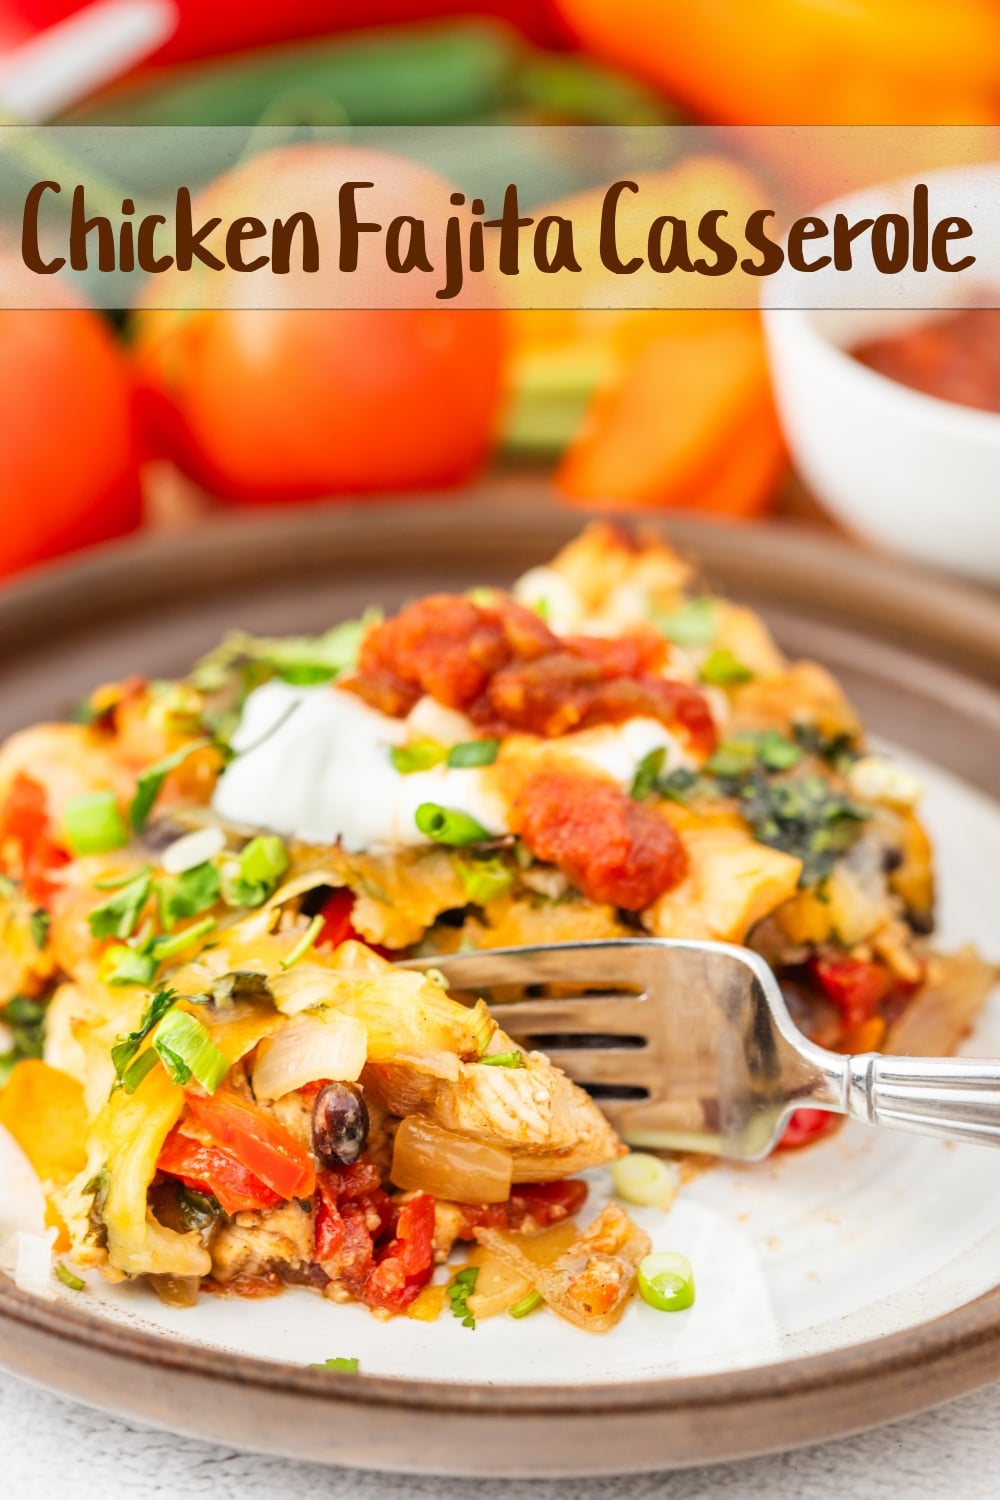 With just one skillet, a bunch of fresh veggies, and a handful of kitchen basics, this irresistible baked chicken fajita casserole might become a regular craving. You'll want to pair this flavorful weeknight casserole with your favorite toppings like sour cream, sliced avocado, and lots of lime for an unbeatable dinner experience! via @cmpollak1